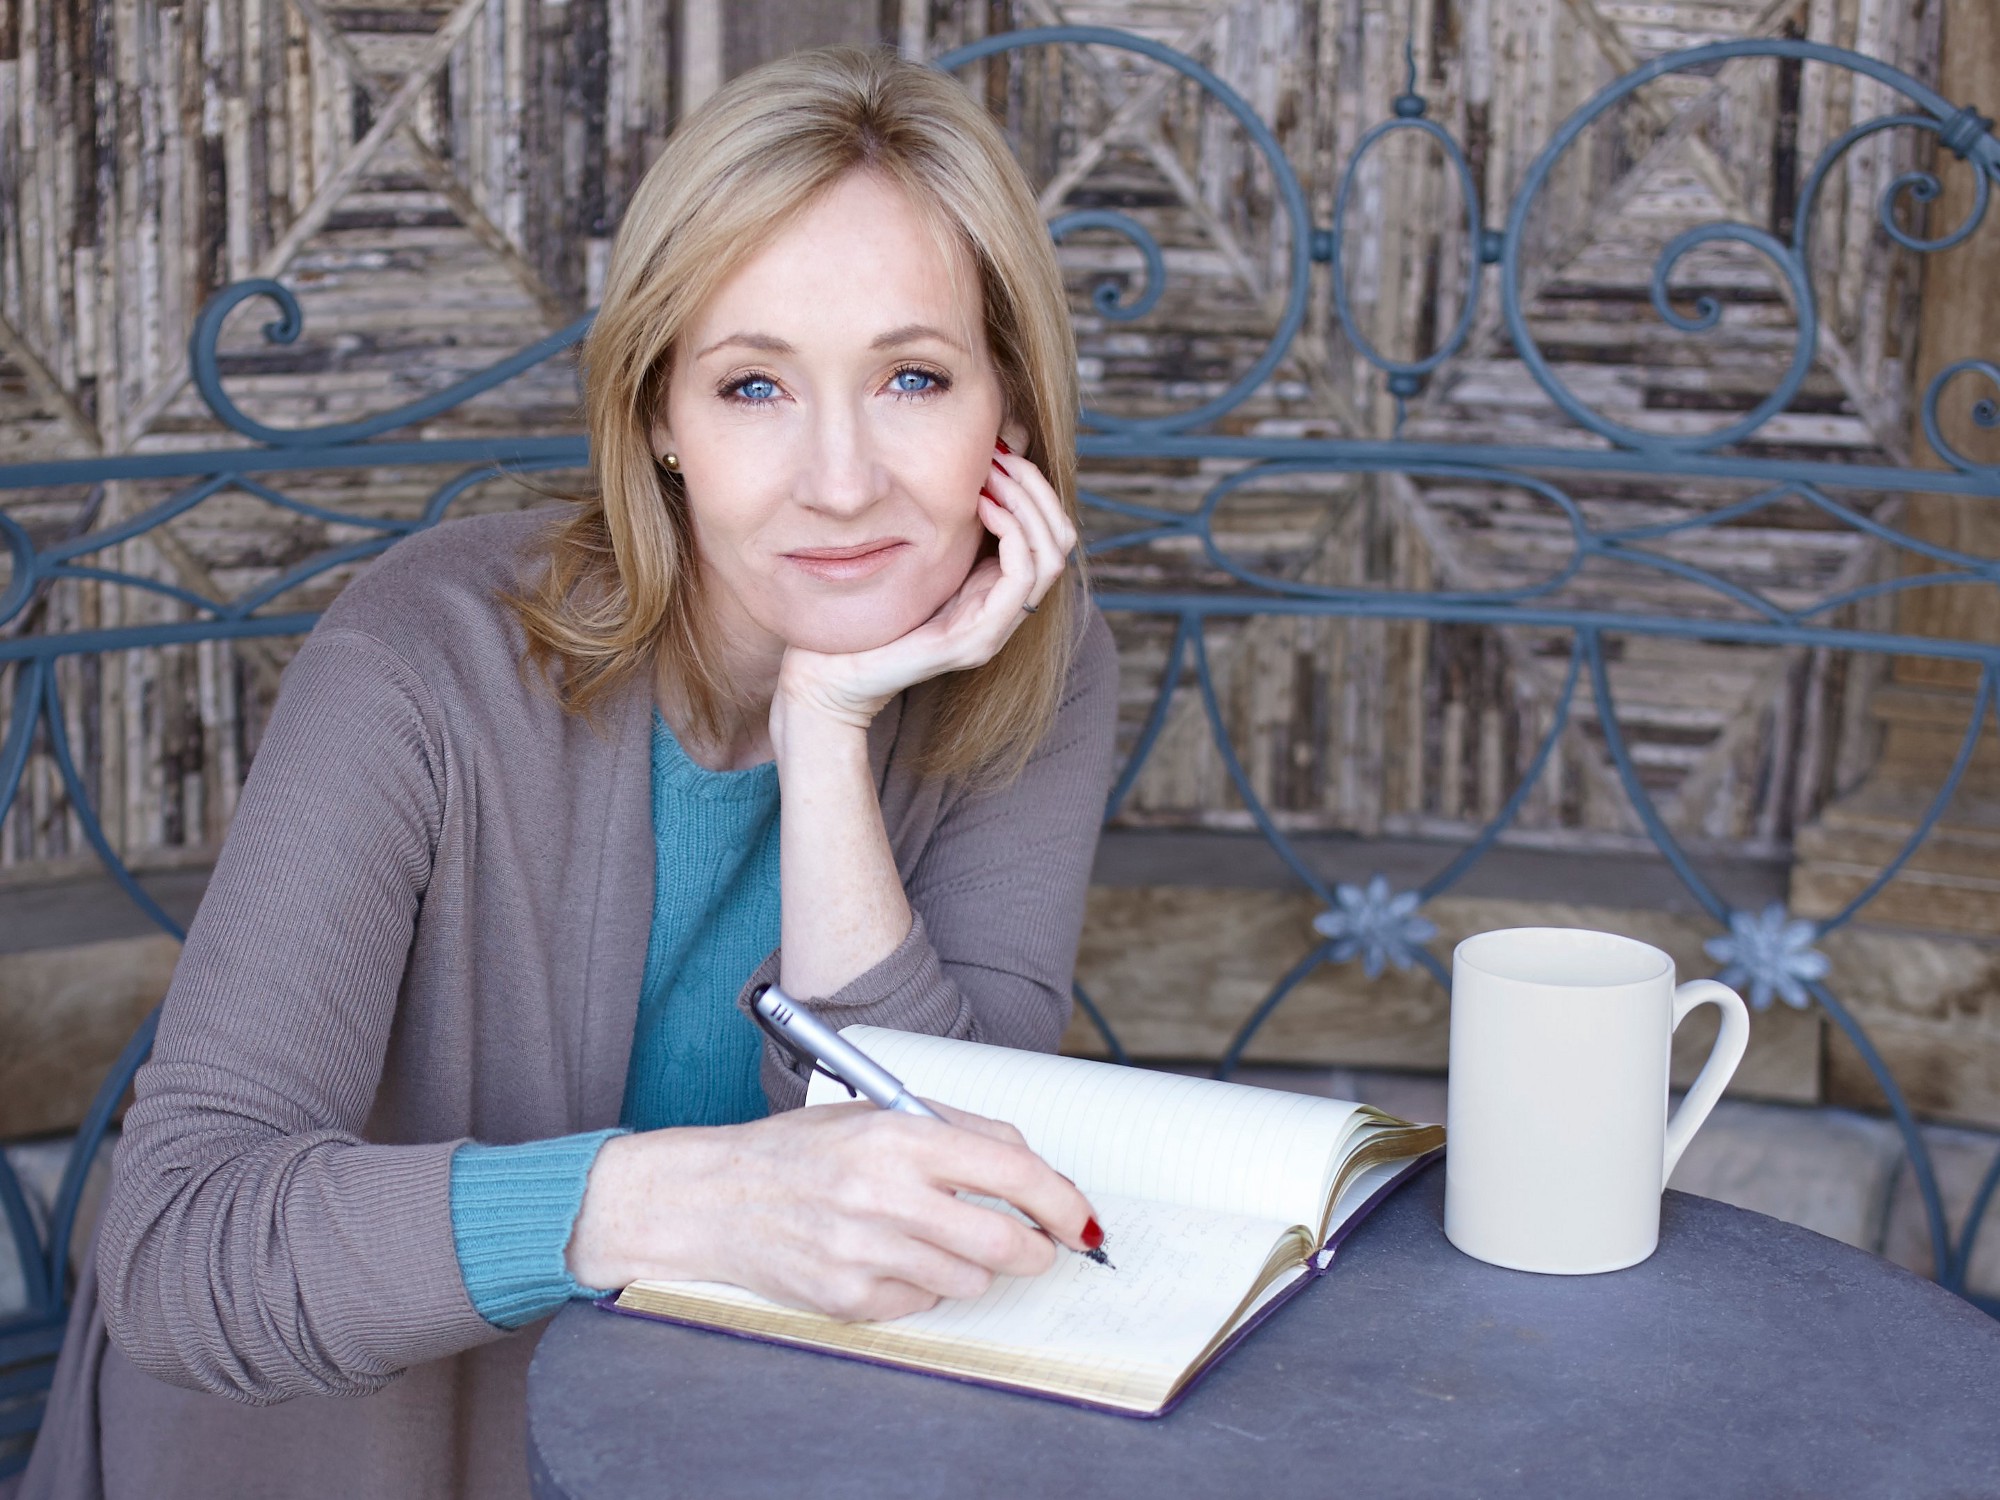 JK Rowling 'not interested' in 'Harry Potter and the Cursed Child' stage sequel